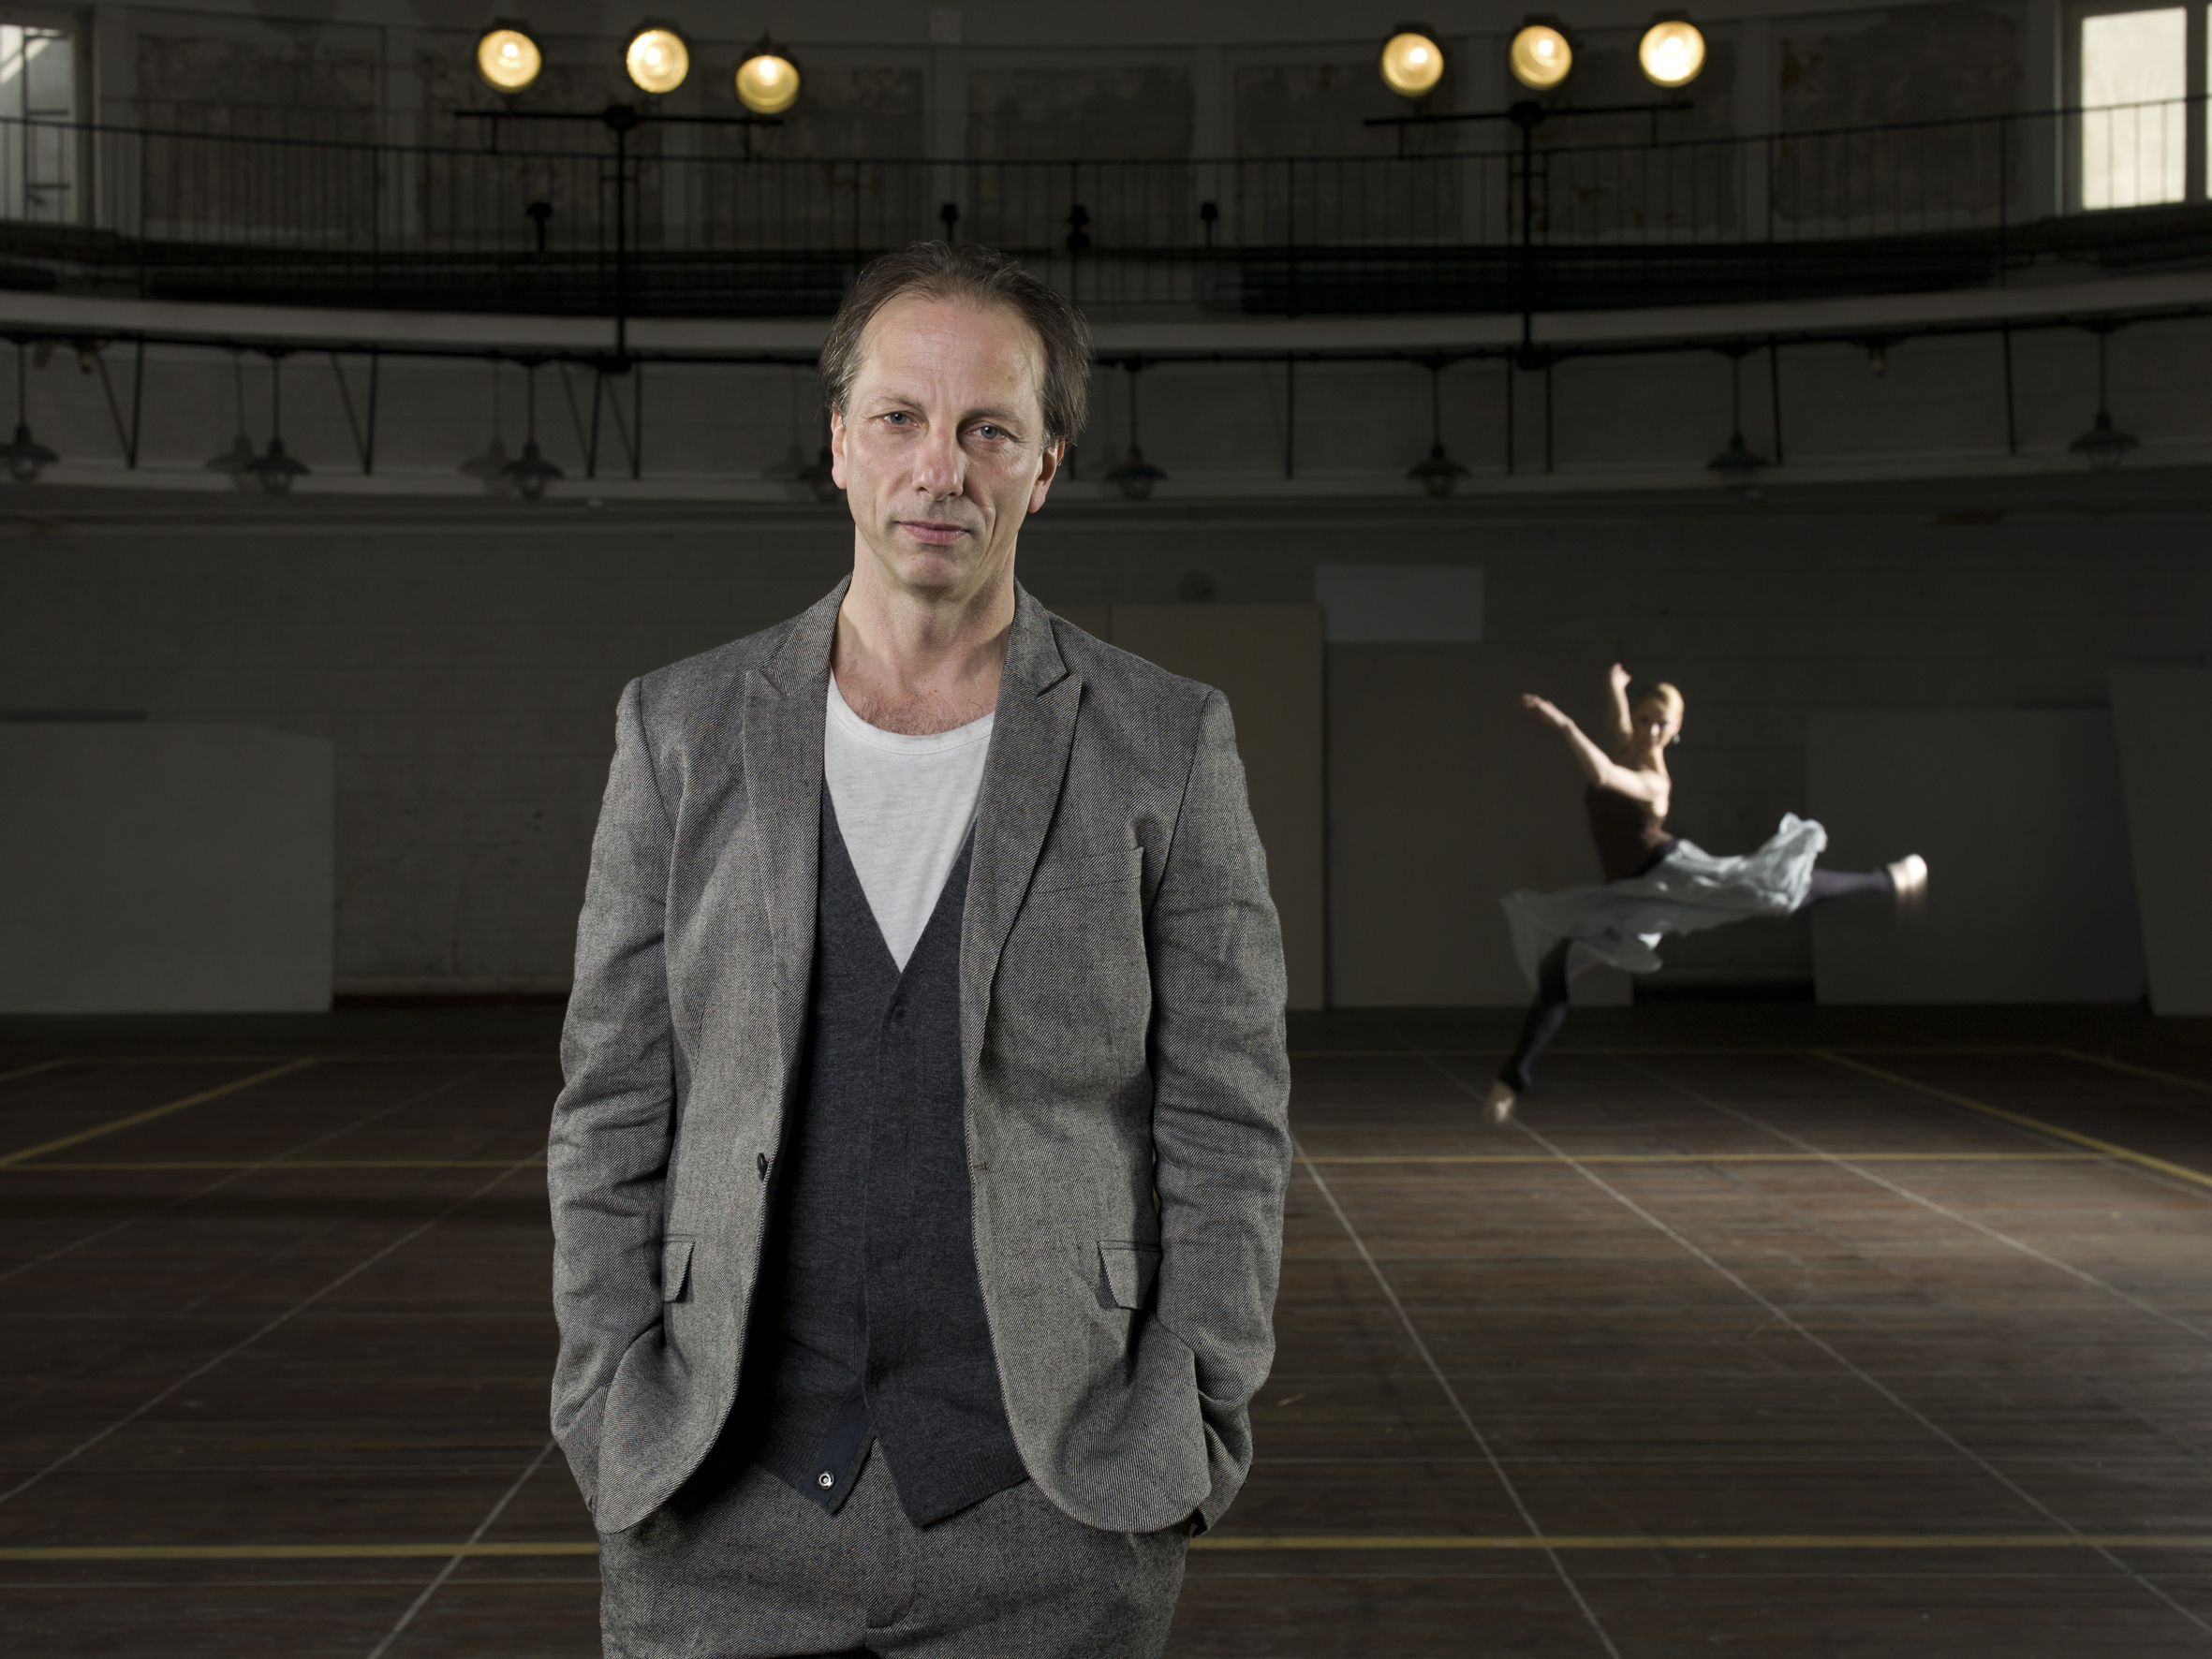 In the foreground, the artist in a gray suit, hands in his; behind his back, a female dancer mid-air in a jump